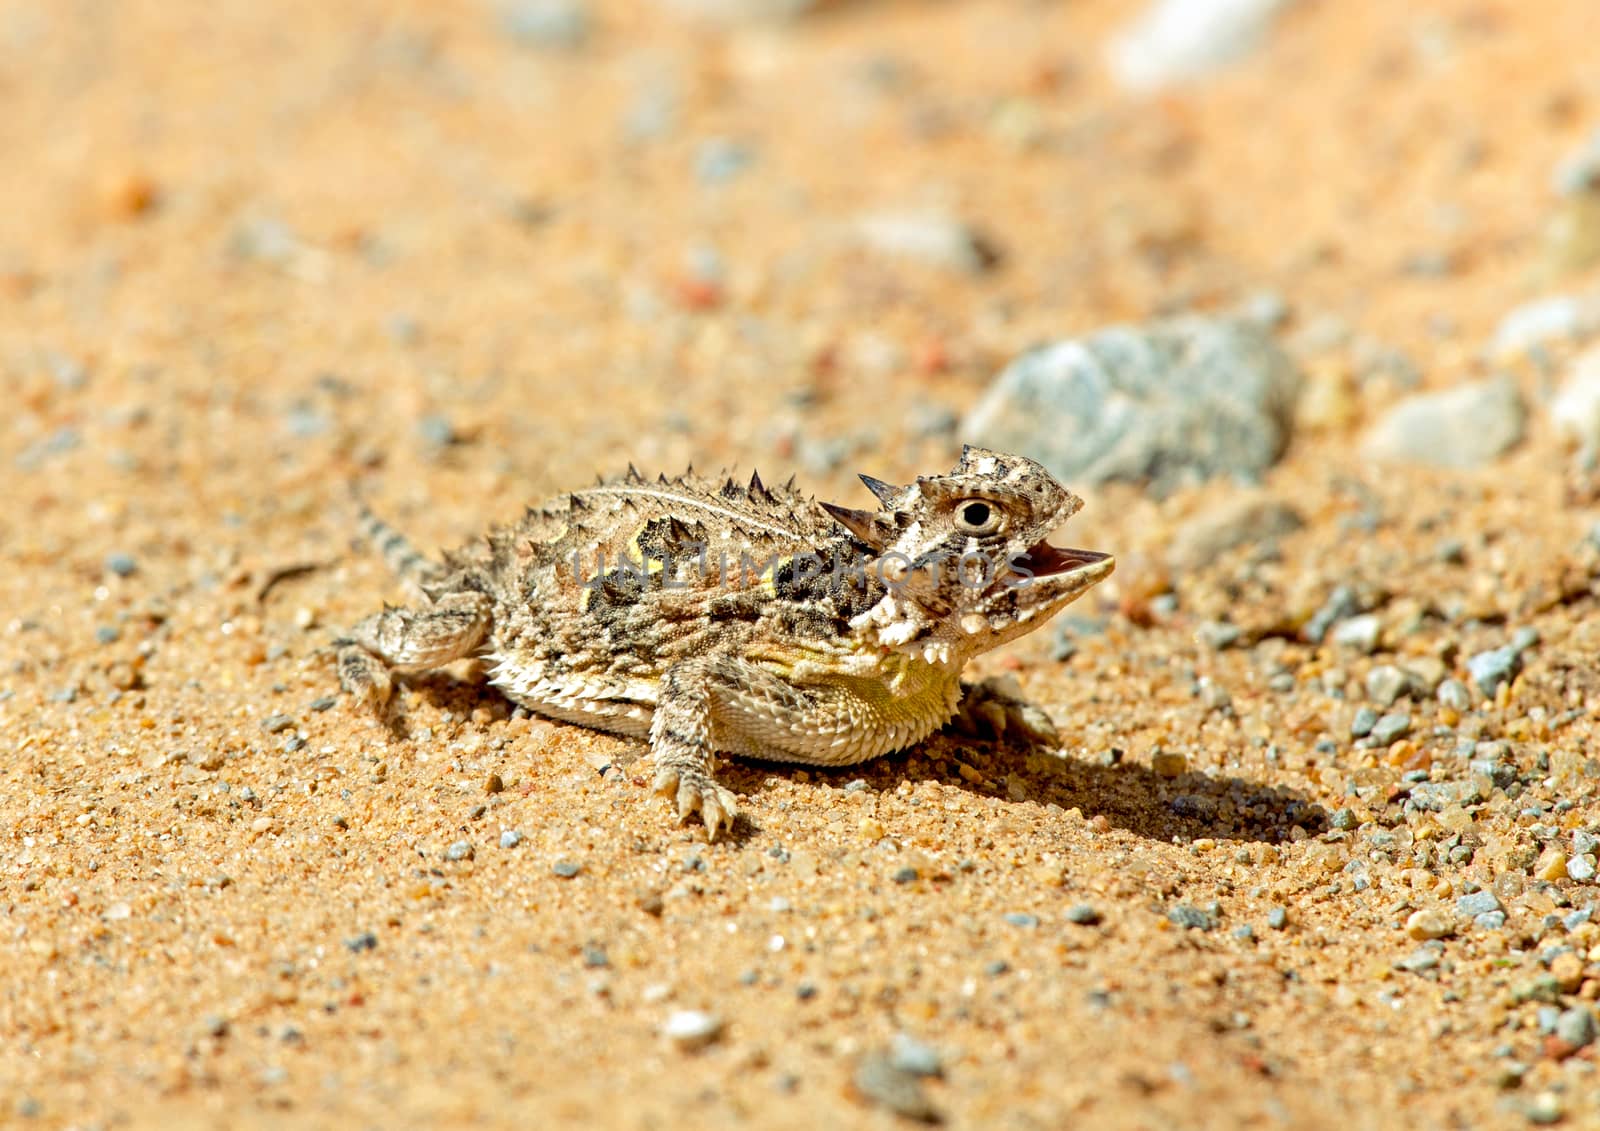 Texas horned lizard by thomas_males